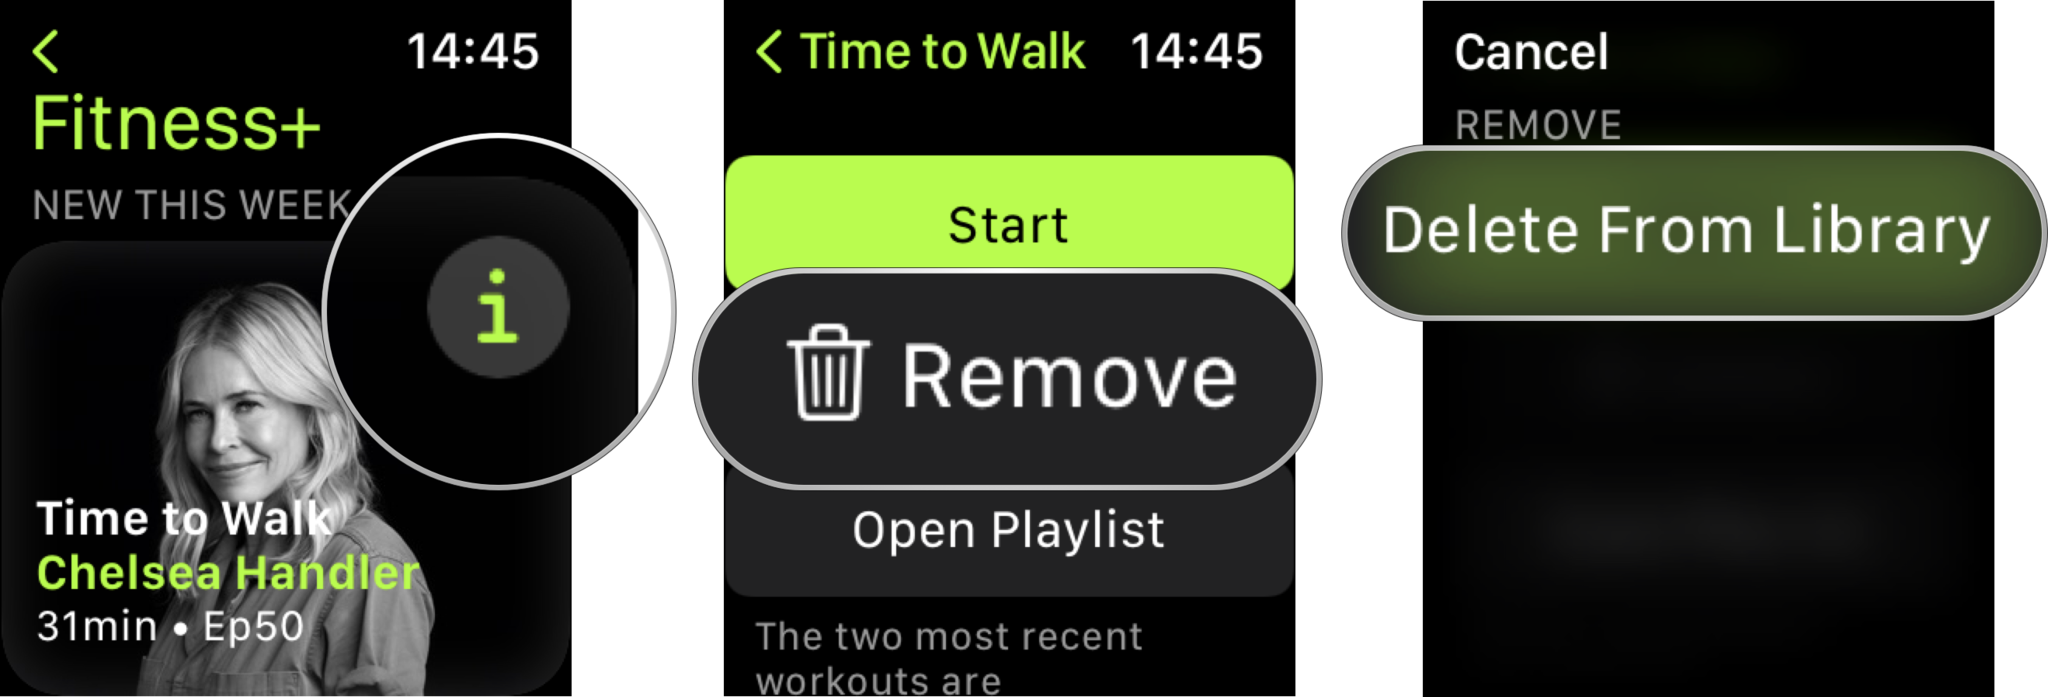 Delete individual Time to Walk and Time to Run episodes on Apple Watch: Tap the i icon on the Audio Workout, scroll down and tap Remove, Tap Delete From Library to confirm.